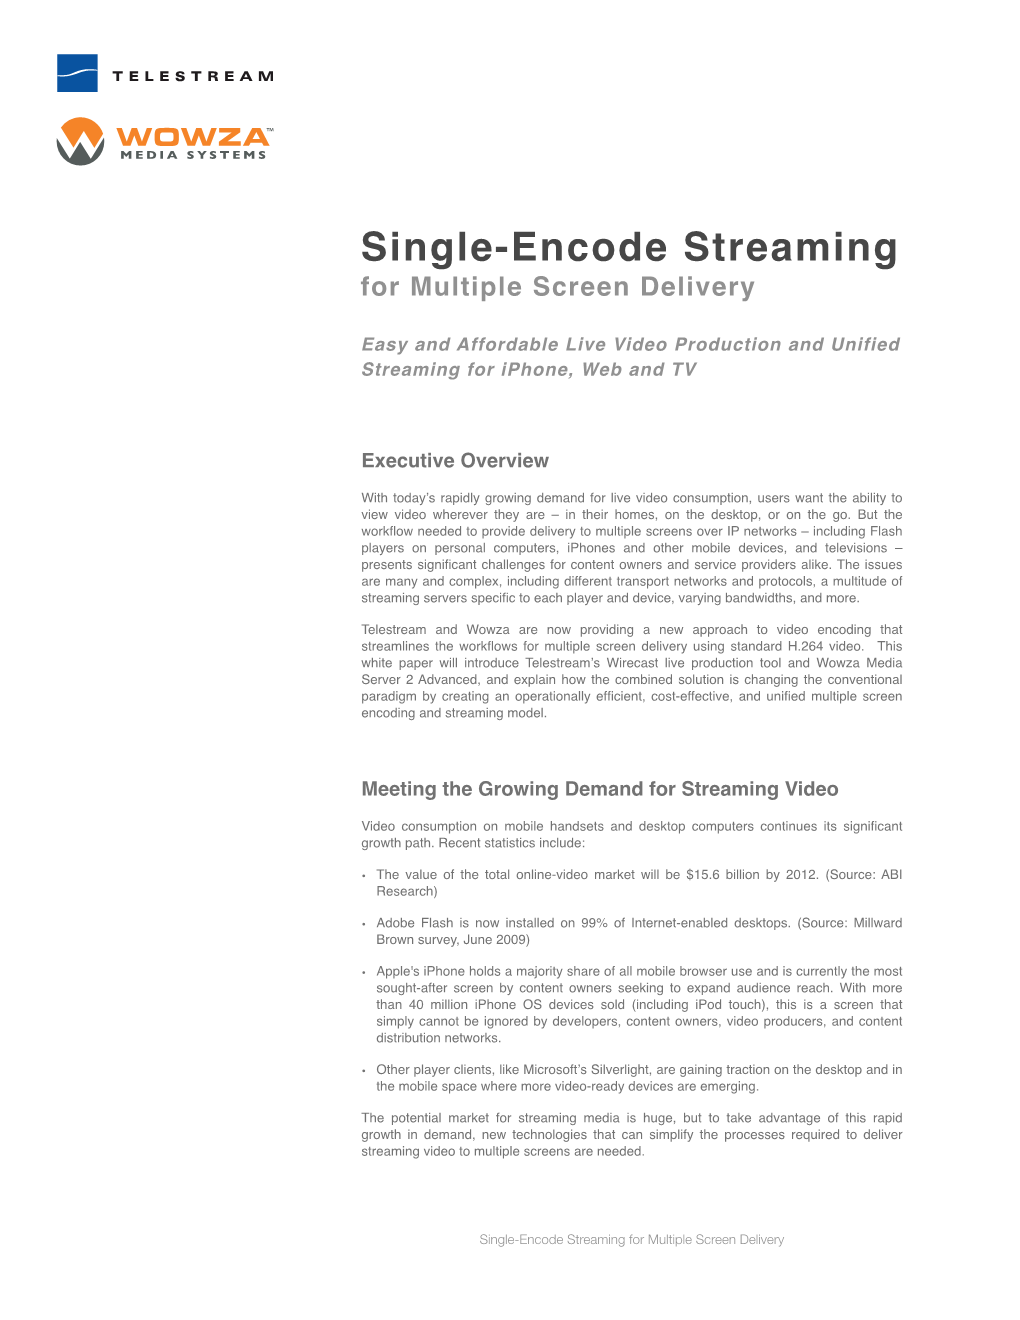 Single-Encode Streaming for Multiple Screen Delivery